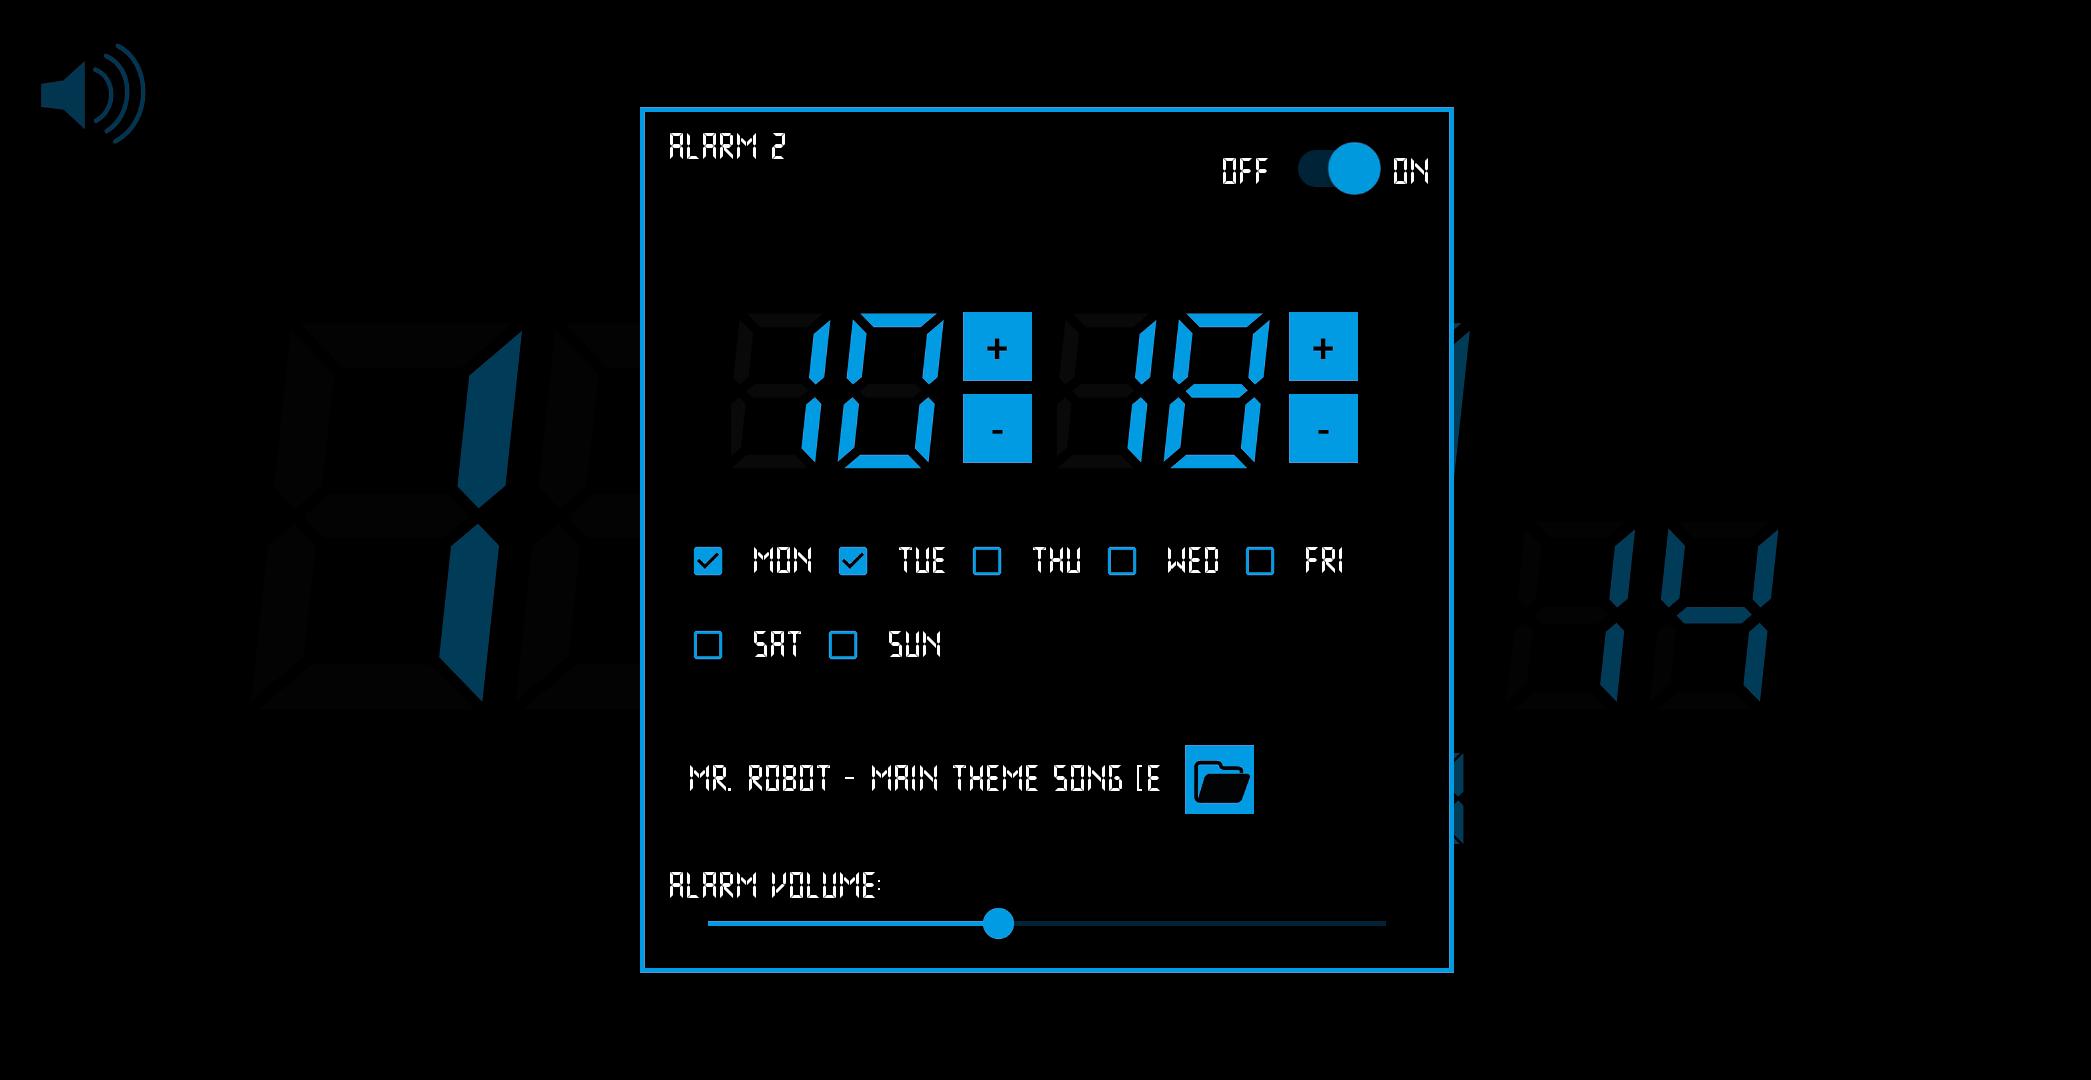 Mp3 alarm clock for Android - APK Download